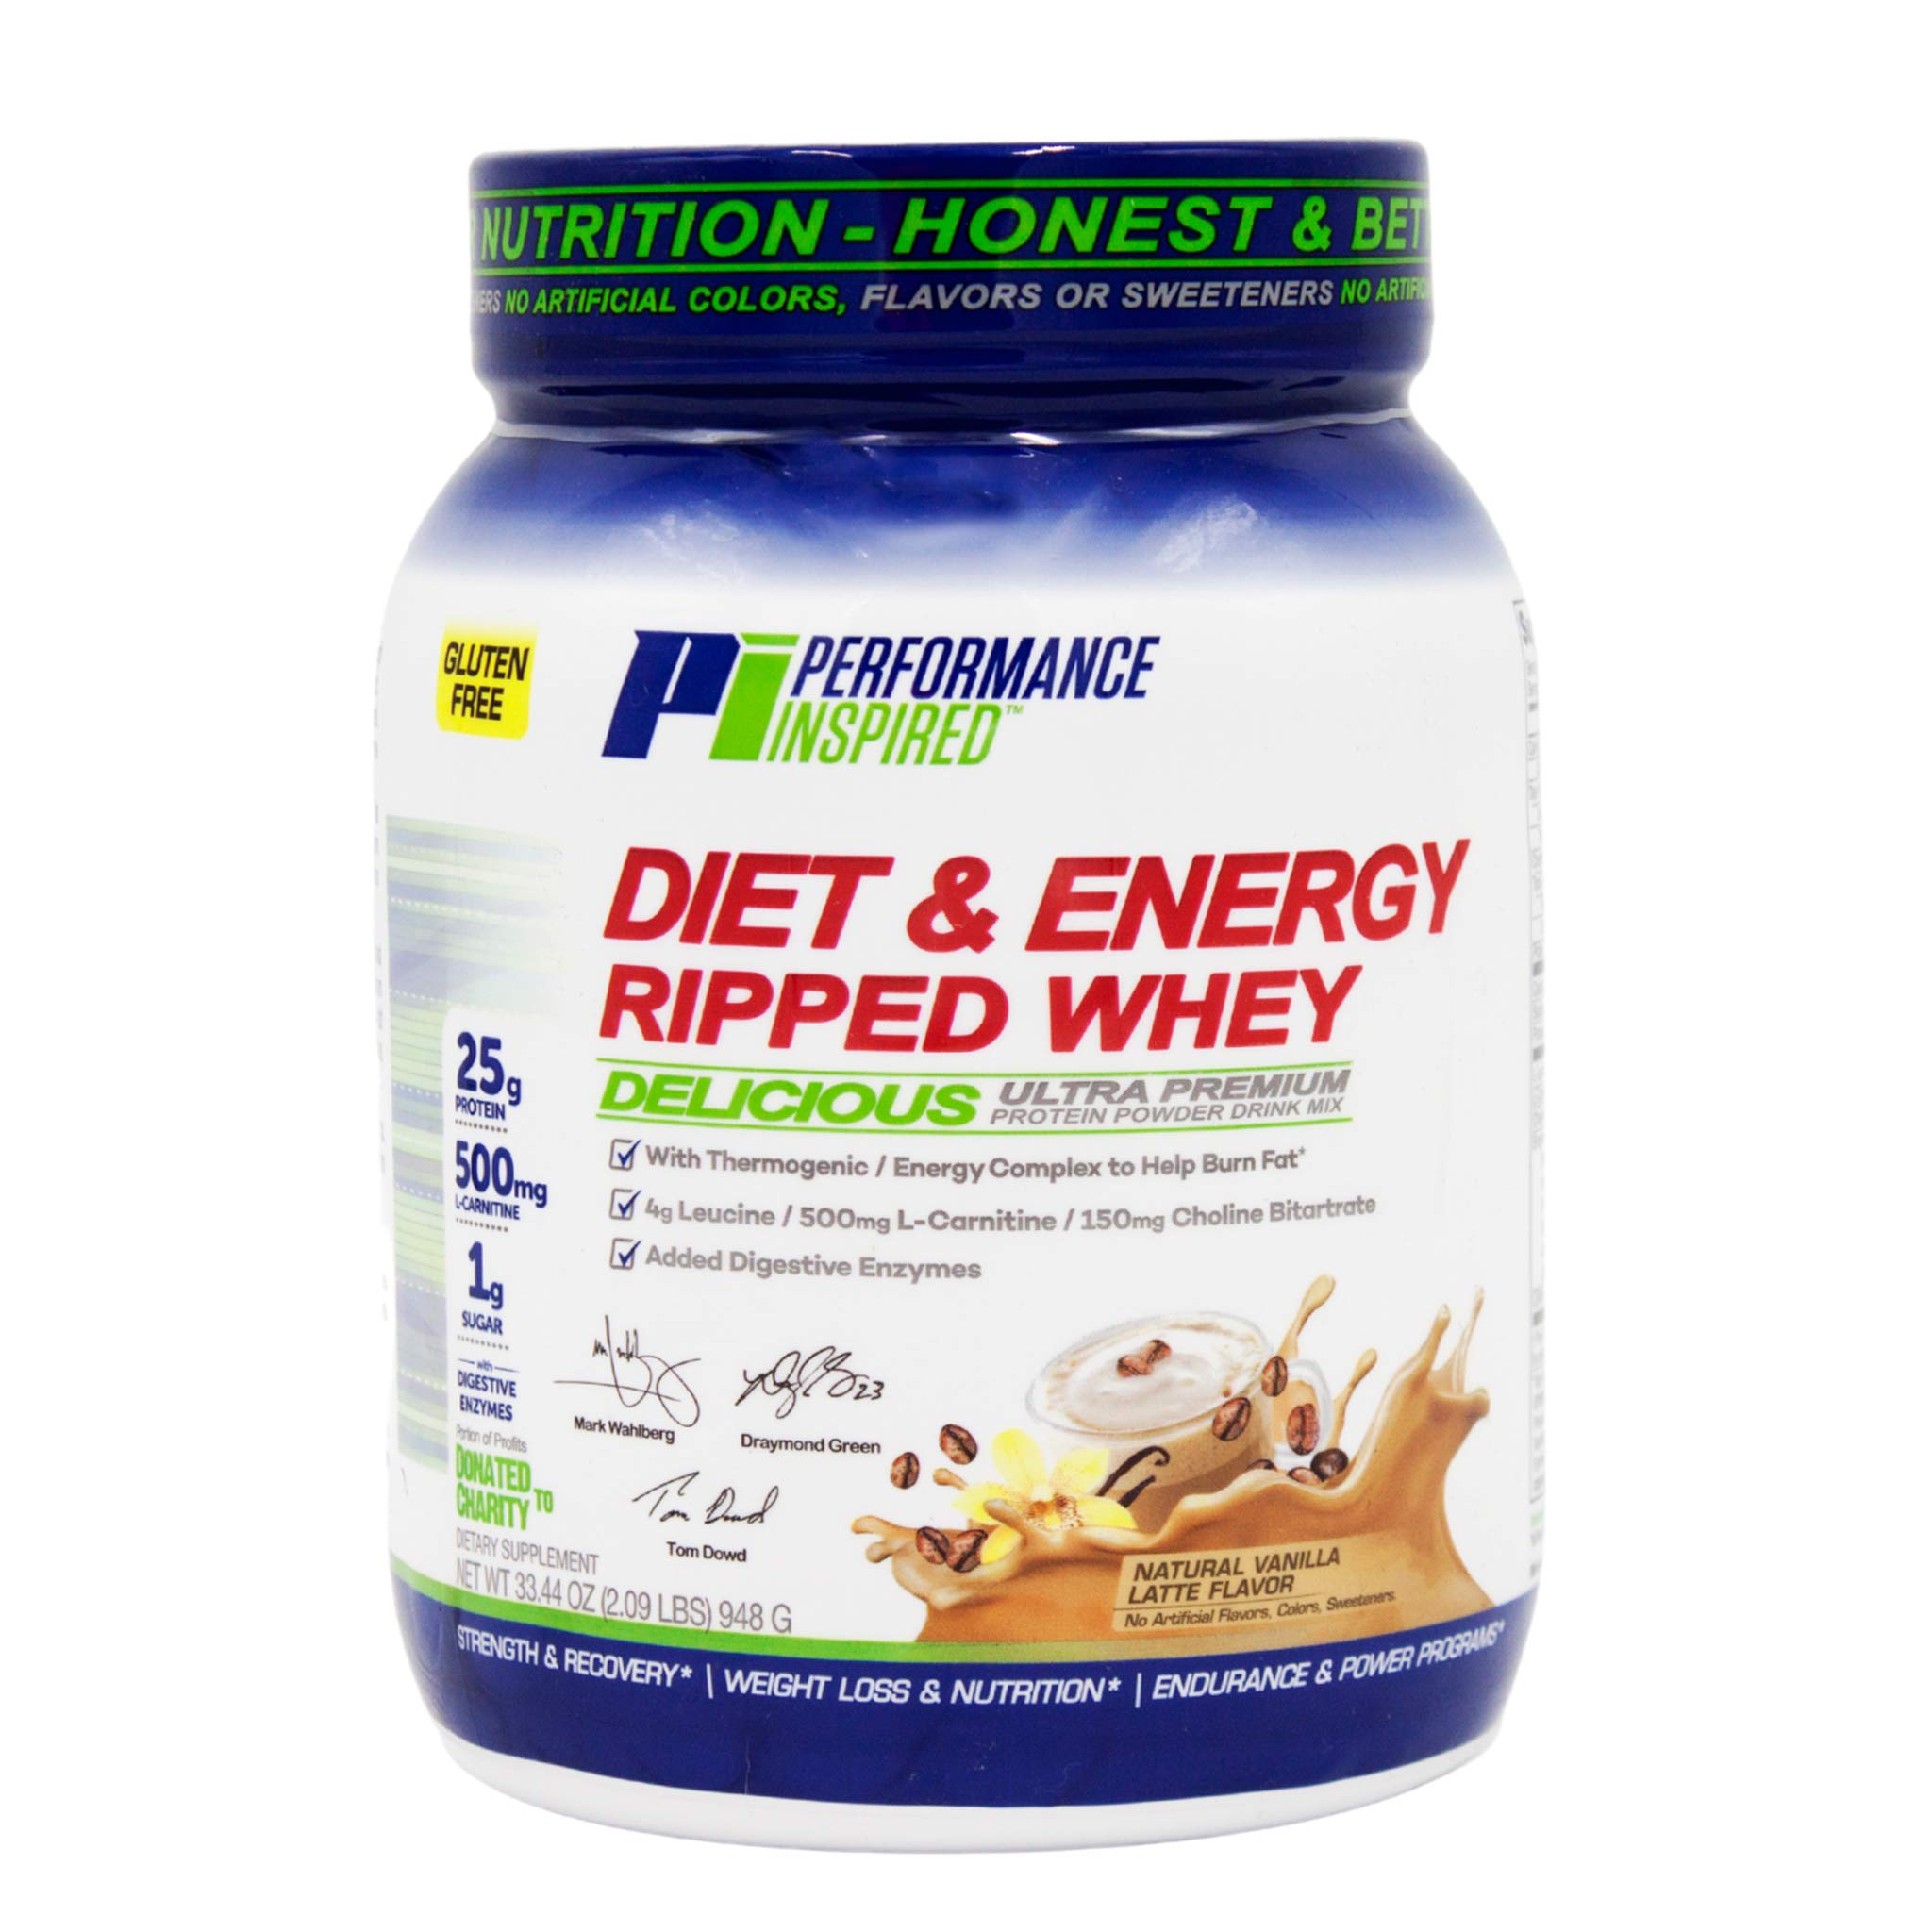 Performance Inspired Diet & Energy Whey Protein - 25G of Clean Protein - Powerful Formula with Added 500mgs of L-Carnitine – Leucine – Digestive Enzymes – Choline - G-Free – 1g Sugar - Vanilla Latte